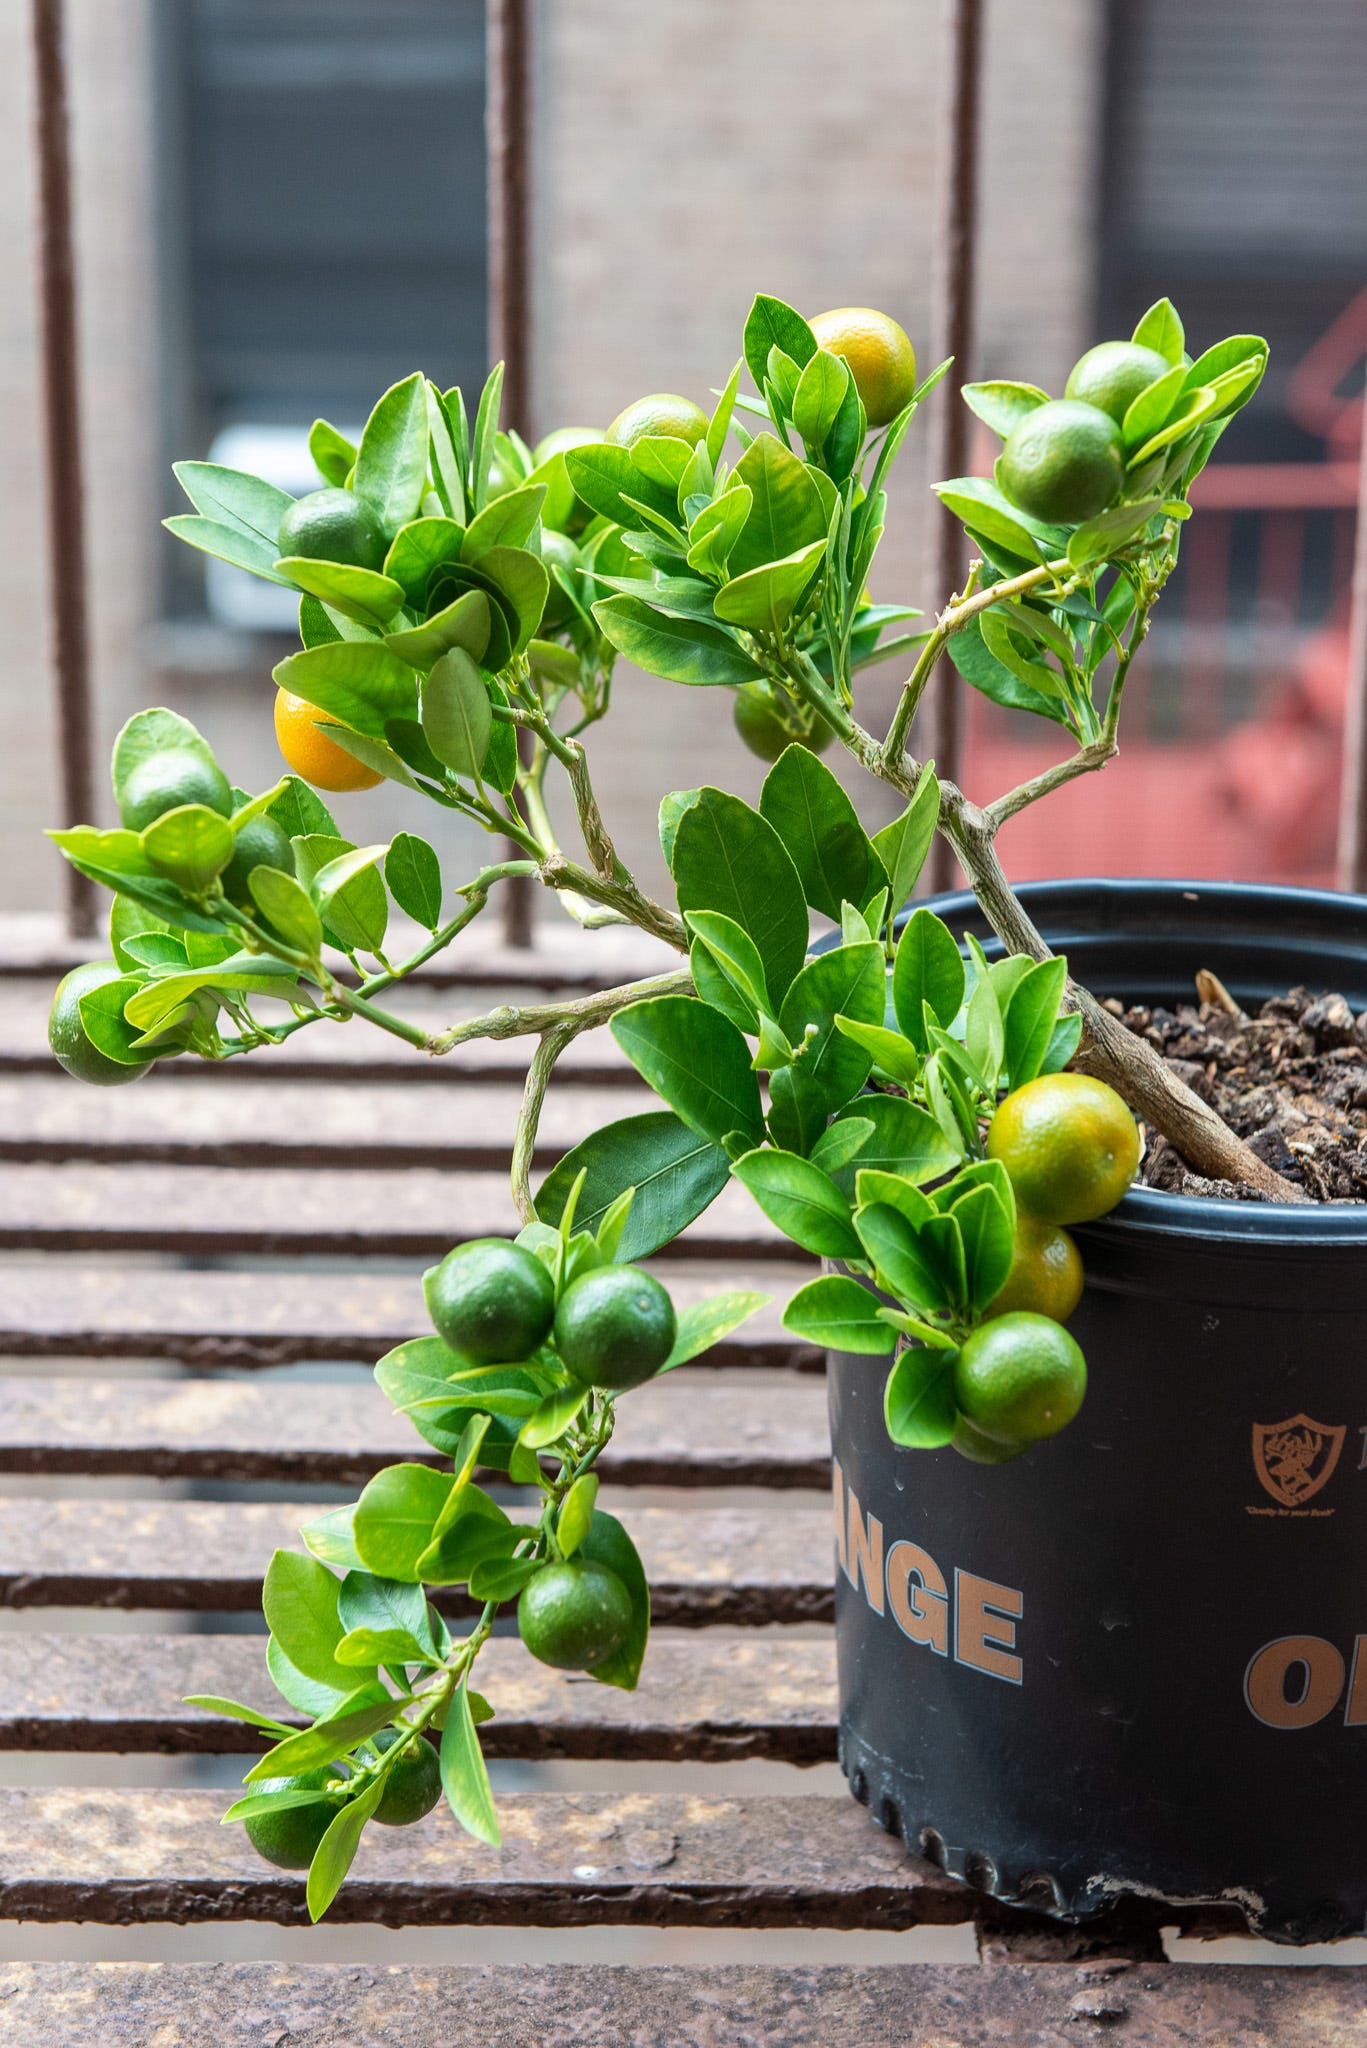 ID: Calamansi pre bonsai on my fire escape, with branches weighed down by abundant tiny green and yellow citrus fruits